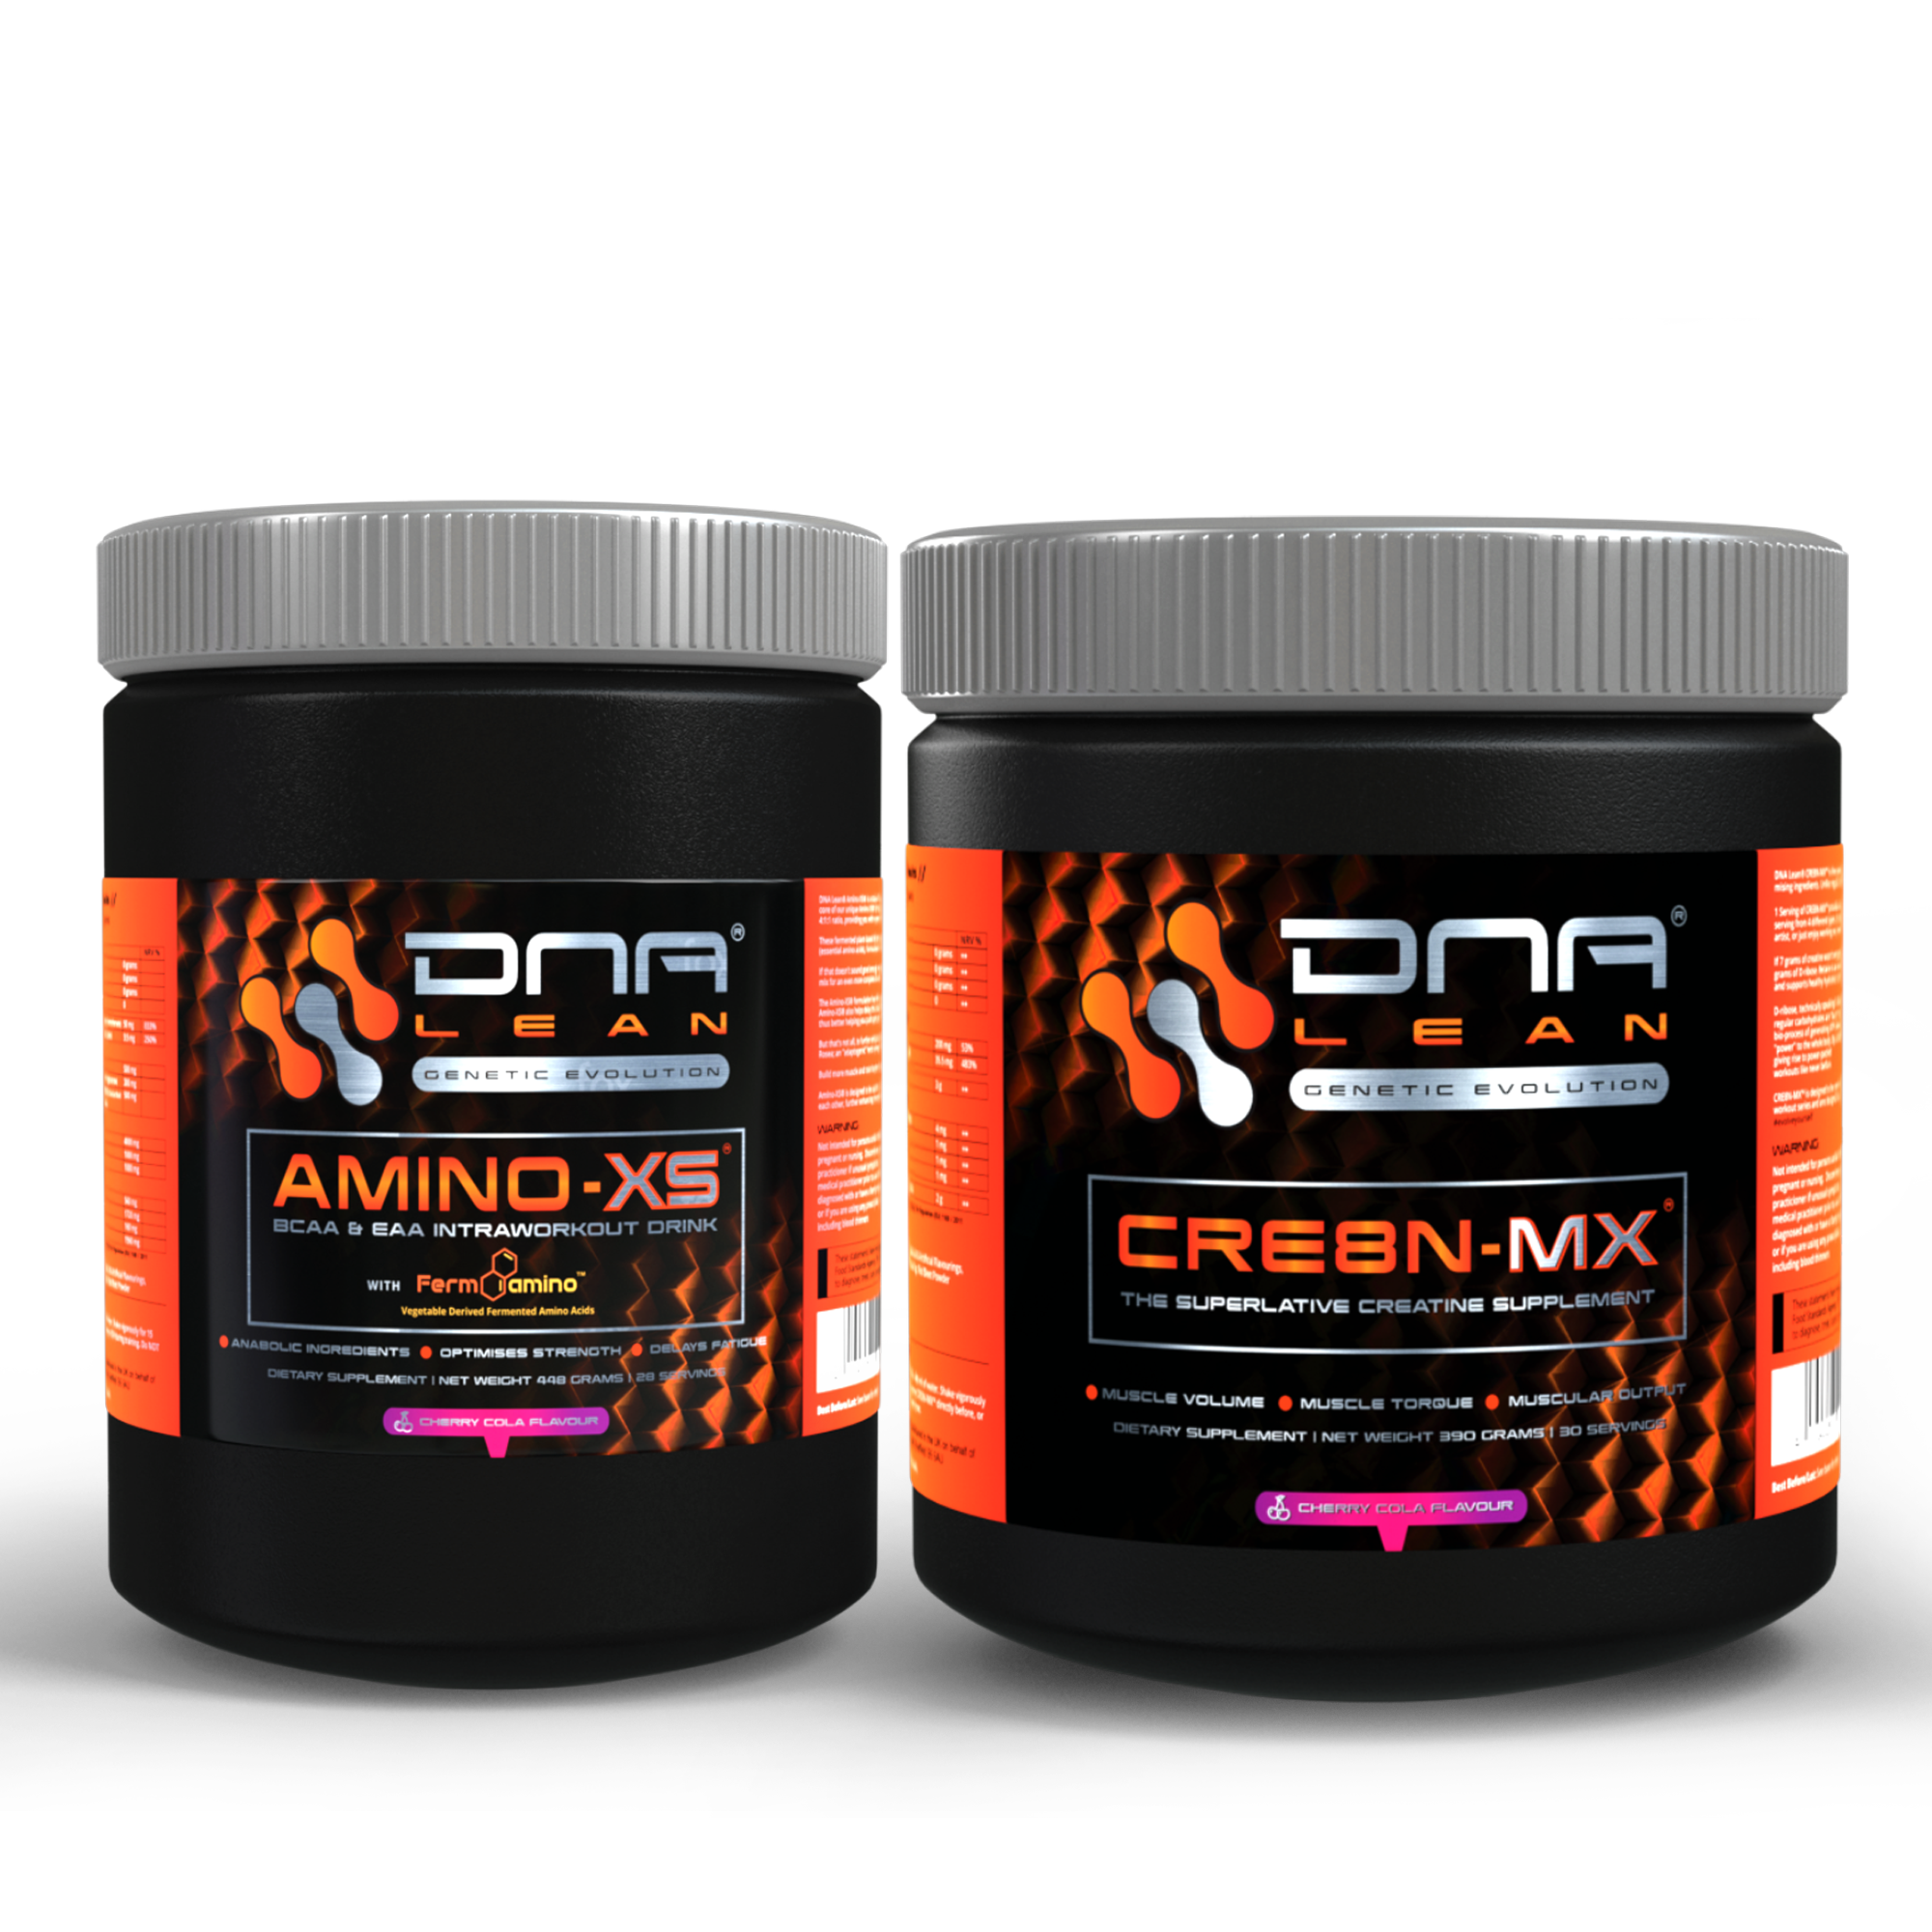 Workout Stack: Amino-XS + CRE8N-MX (SAVE 10%)